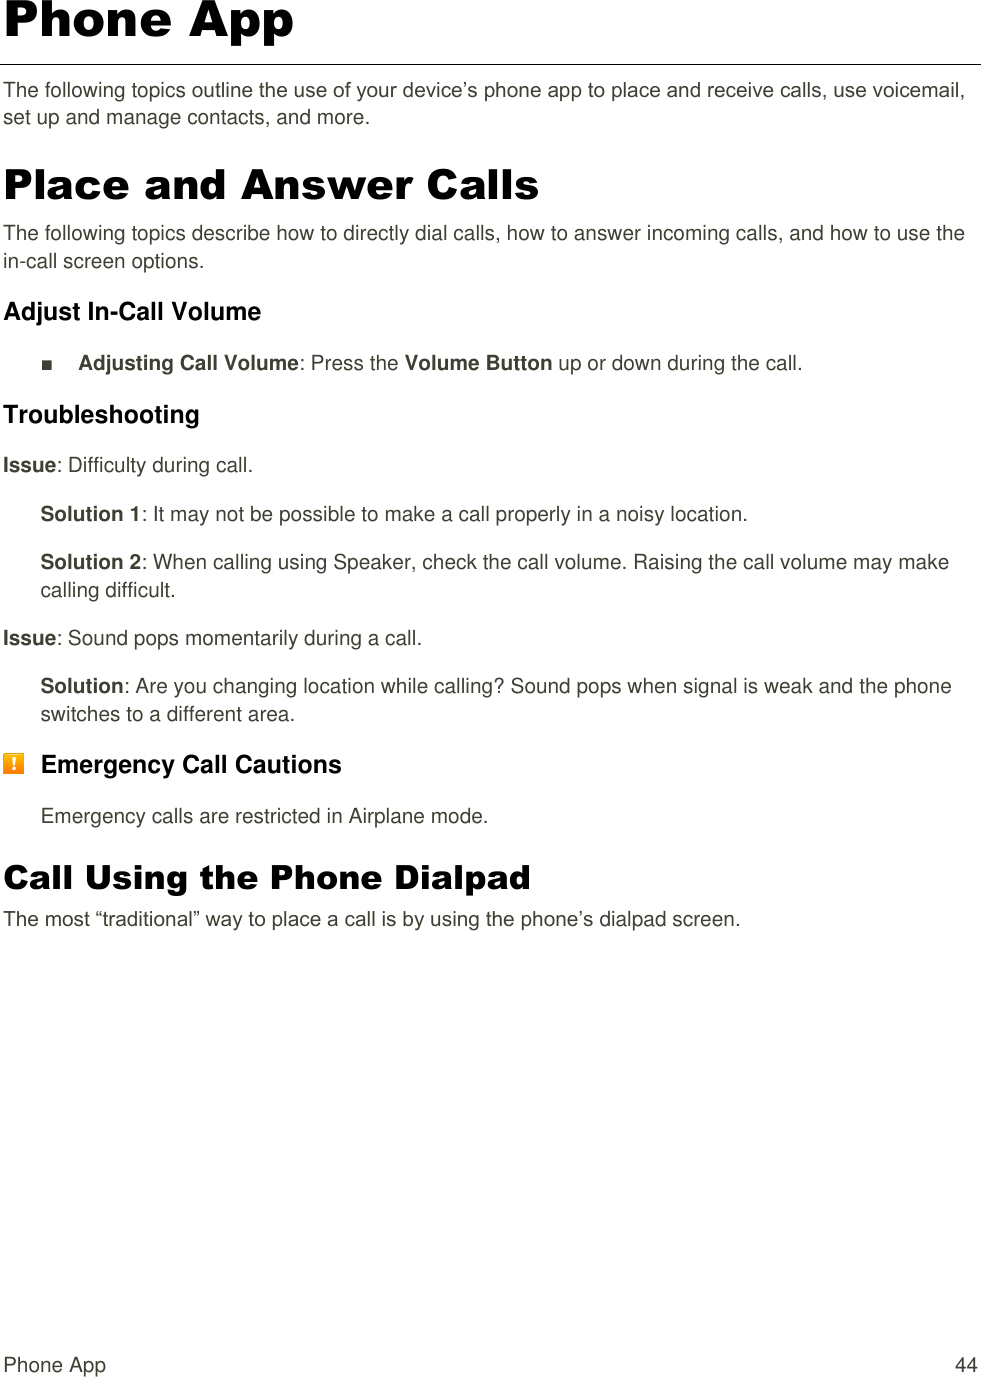 Phone App  44 Phone App The following topics outline the use of your device’s phone app to place and receive calls, use voicemail, set up and manage contacts, and more. Place and Answer Calls The following topics describe how to directly dial calls, how to answer incoming calls, and how to use the in-call screen options. Adjust In-Call Volume ■ Adjusting Call Volume: Press the Volume Button up or down during the call. Troubleshooting Issue: Difficulty during call. Solution 1: It may not be possible to make a call properly in a noisy location. Solution 2: When calling using Speaker, check the call volume. Raising the call volume may make calling difficult. Issue: Sound pops momentarily during a call. Solution: Are you changing location while calling? Sound pops when signal is weak and the phone switches to a different area.  Emergency Call Cautions Emergency calls are restricted in Airplane mode. Call Using the Phone Dialpad The most “traditional” way to place a call is by using the phone’s dialpad screen.  